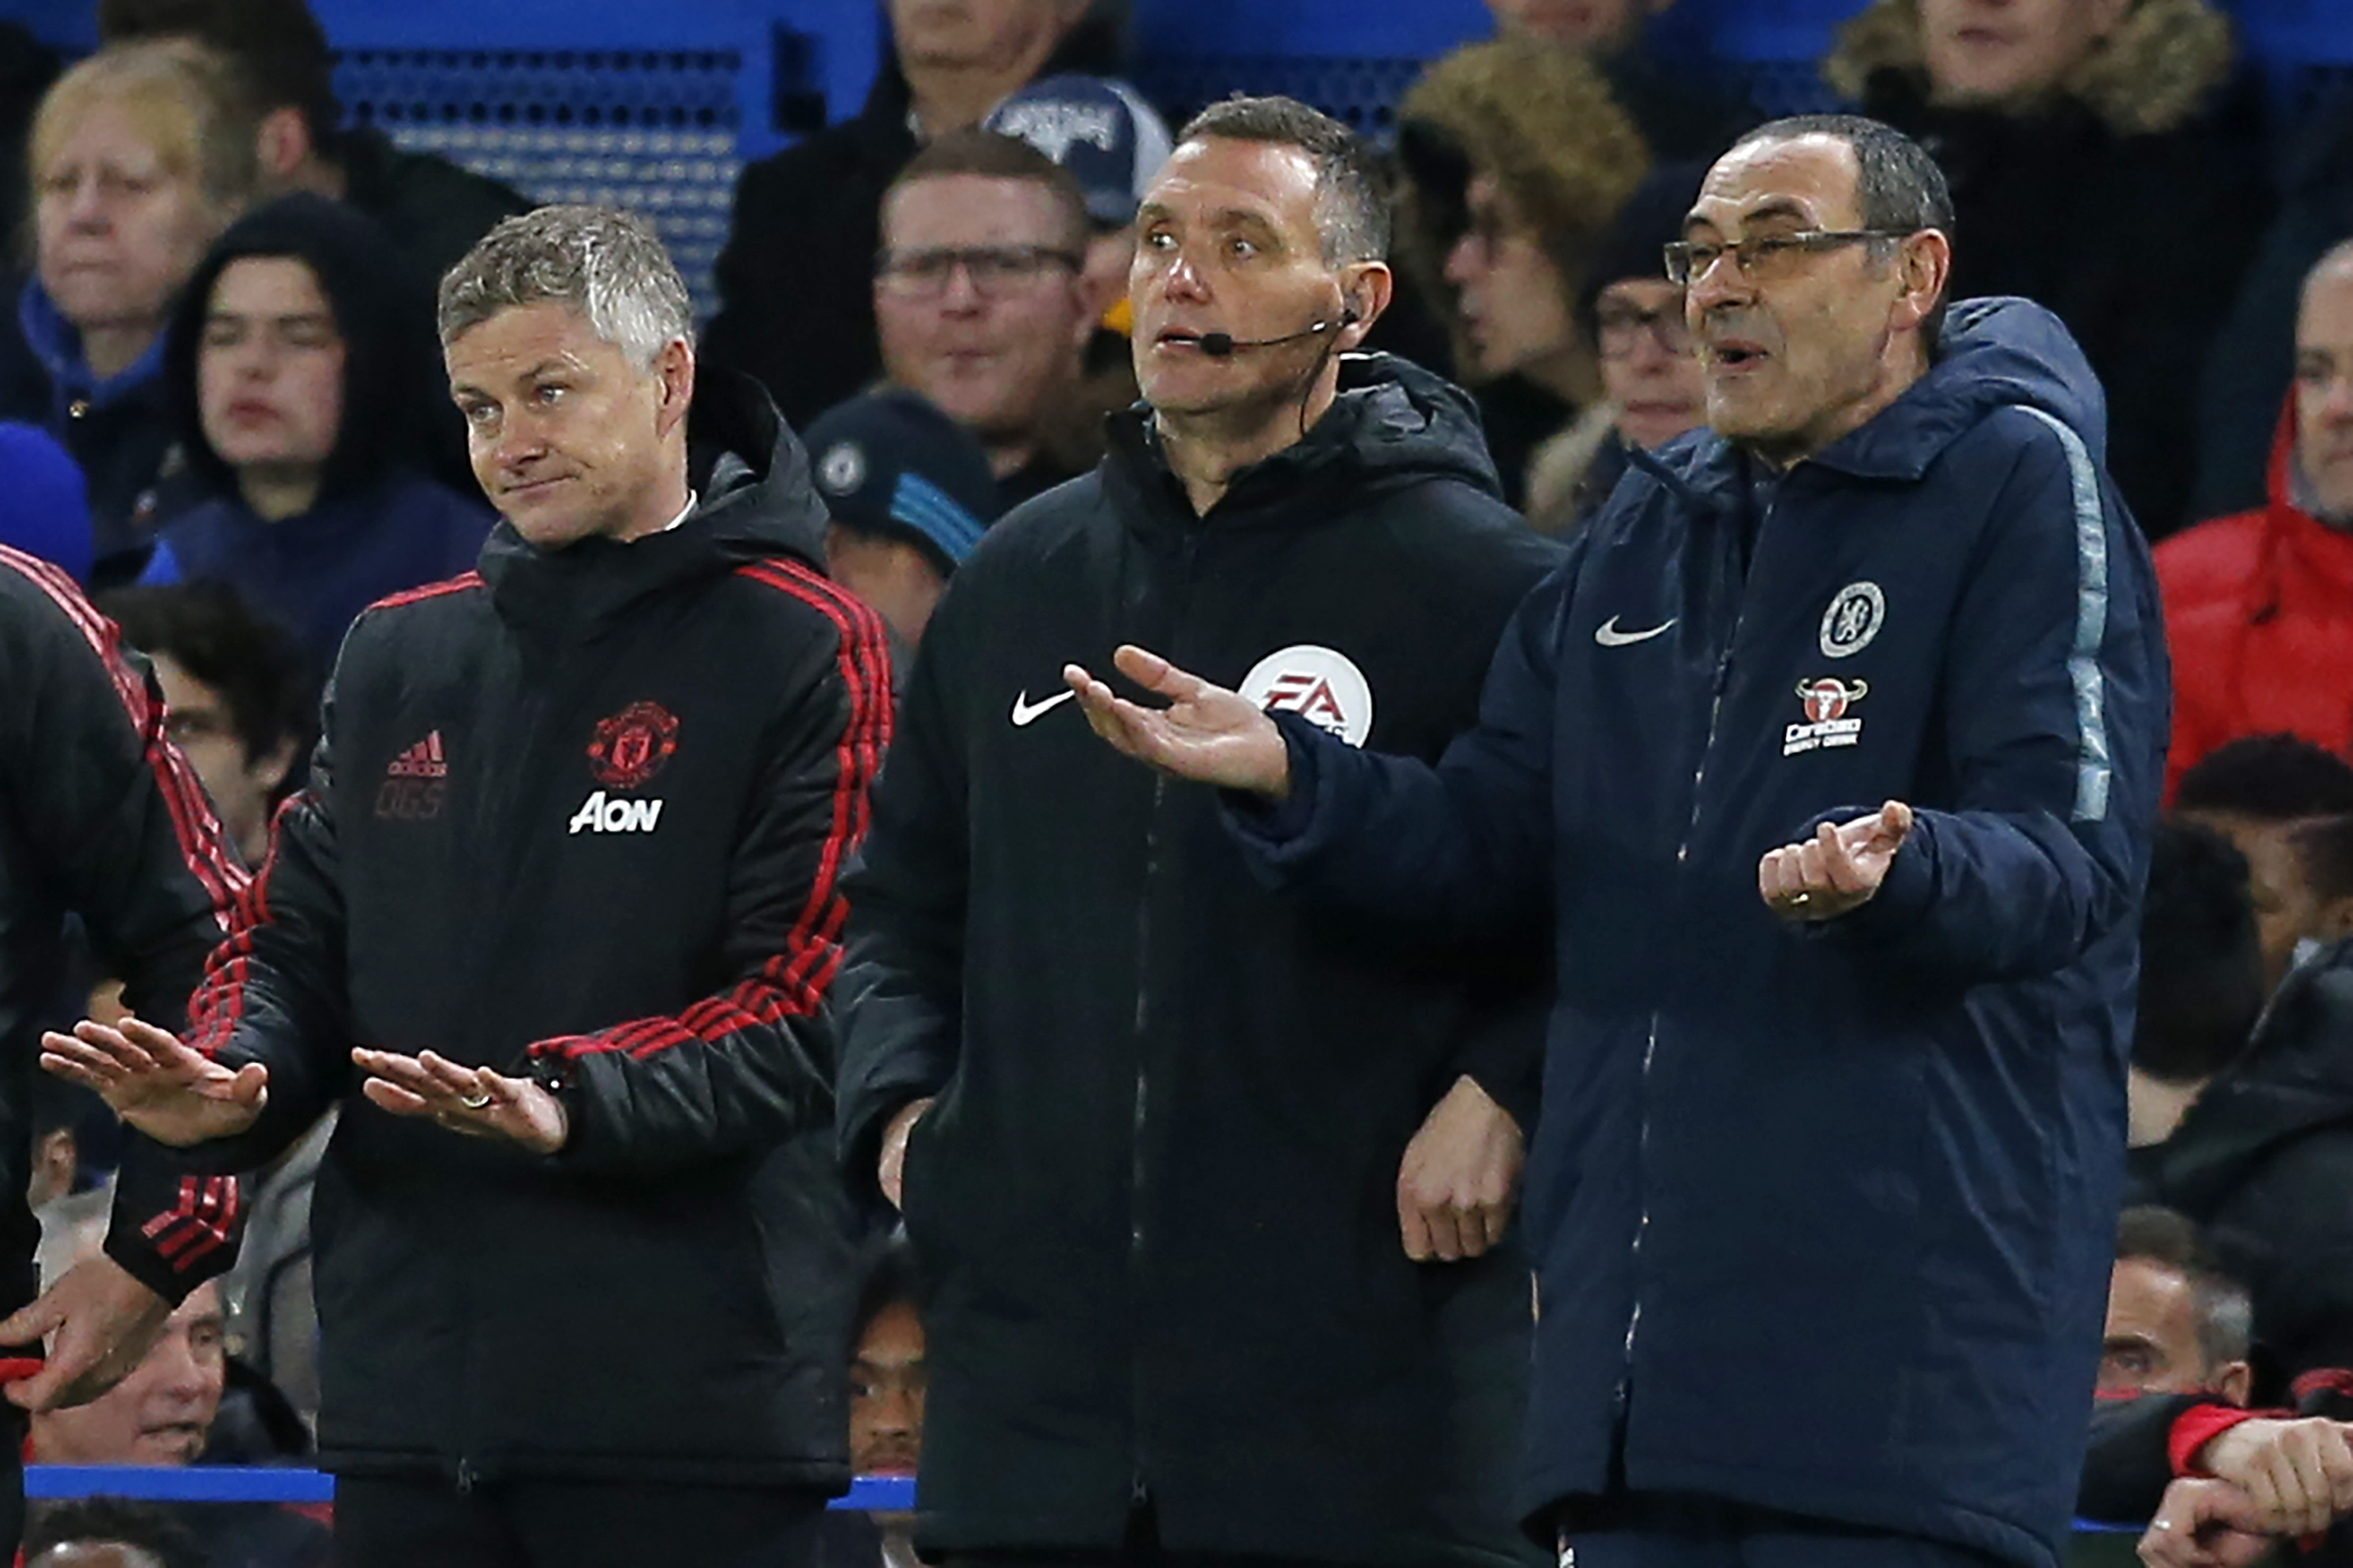 Manchester United's  Norwegian caretaker manager Ole Gunnar Solskjaer (L) and Chelsea's Italian head coach Maurizio Sarri (R) gesture on the touchline during the English FA Cup fifth round football match between Chelsea and Manchester United at Stamford Bridge in London on February 18, 2019. (Photo by Ian KINGTON / AFP) / RESTRICTED TO EDITORIAL USE. No use with unauthorized audio, video, data, fixture lists, club/league logos or 'live' services. Online in-match use limited to 120 images. An additional 40 images may be used in extra time. No video emulation. Social media in-match use limited to 120 images. An additional 40 images may be used in extra time. No use in betting publications, games or single club/league/player publications. /         (Photo credit should read IAN KINGTON/AFP/Getty Images)